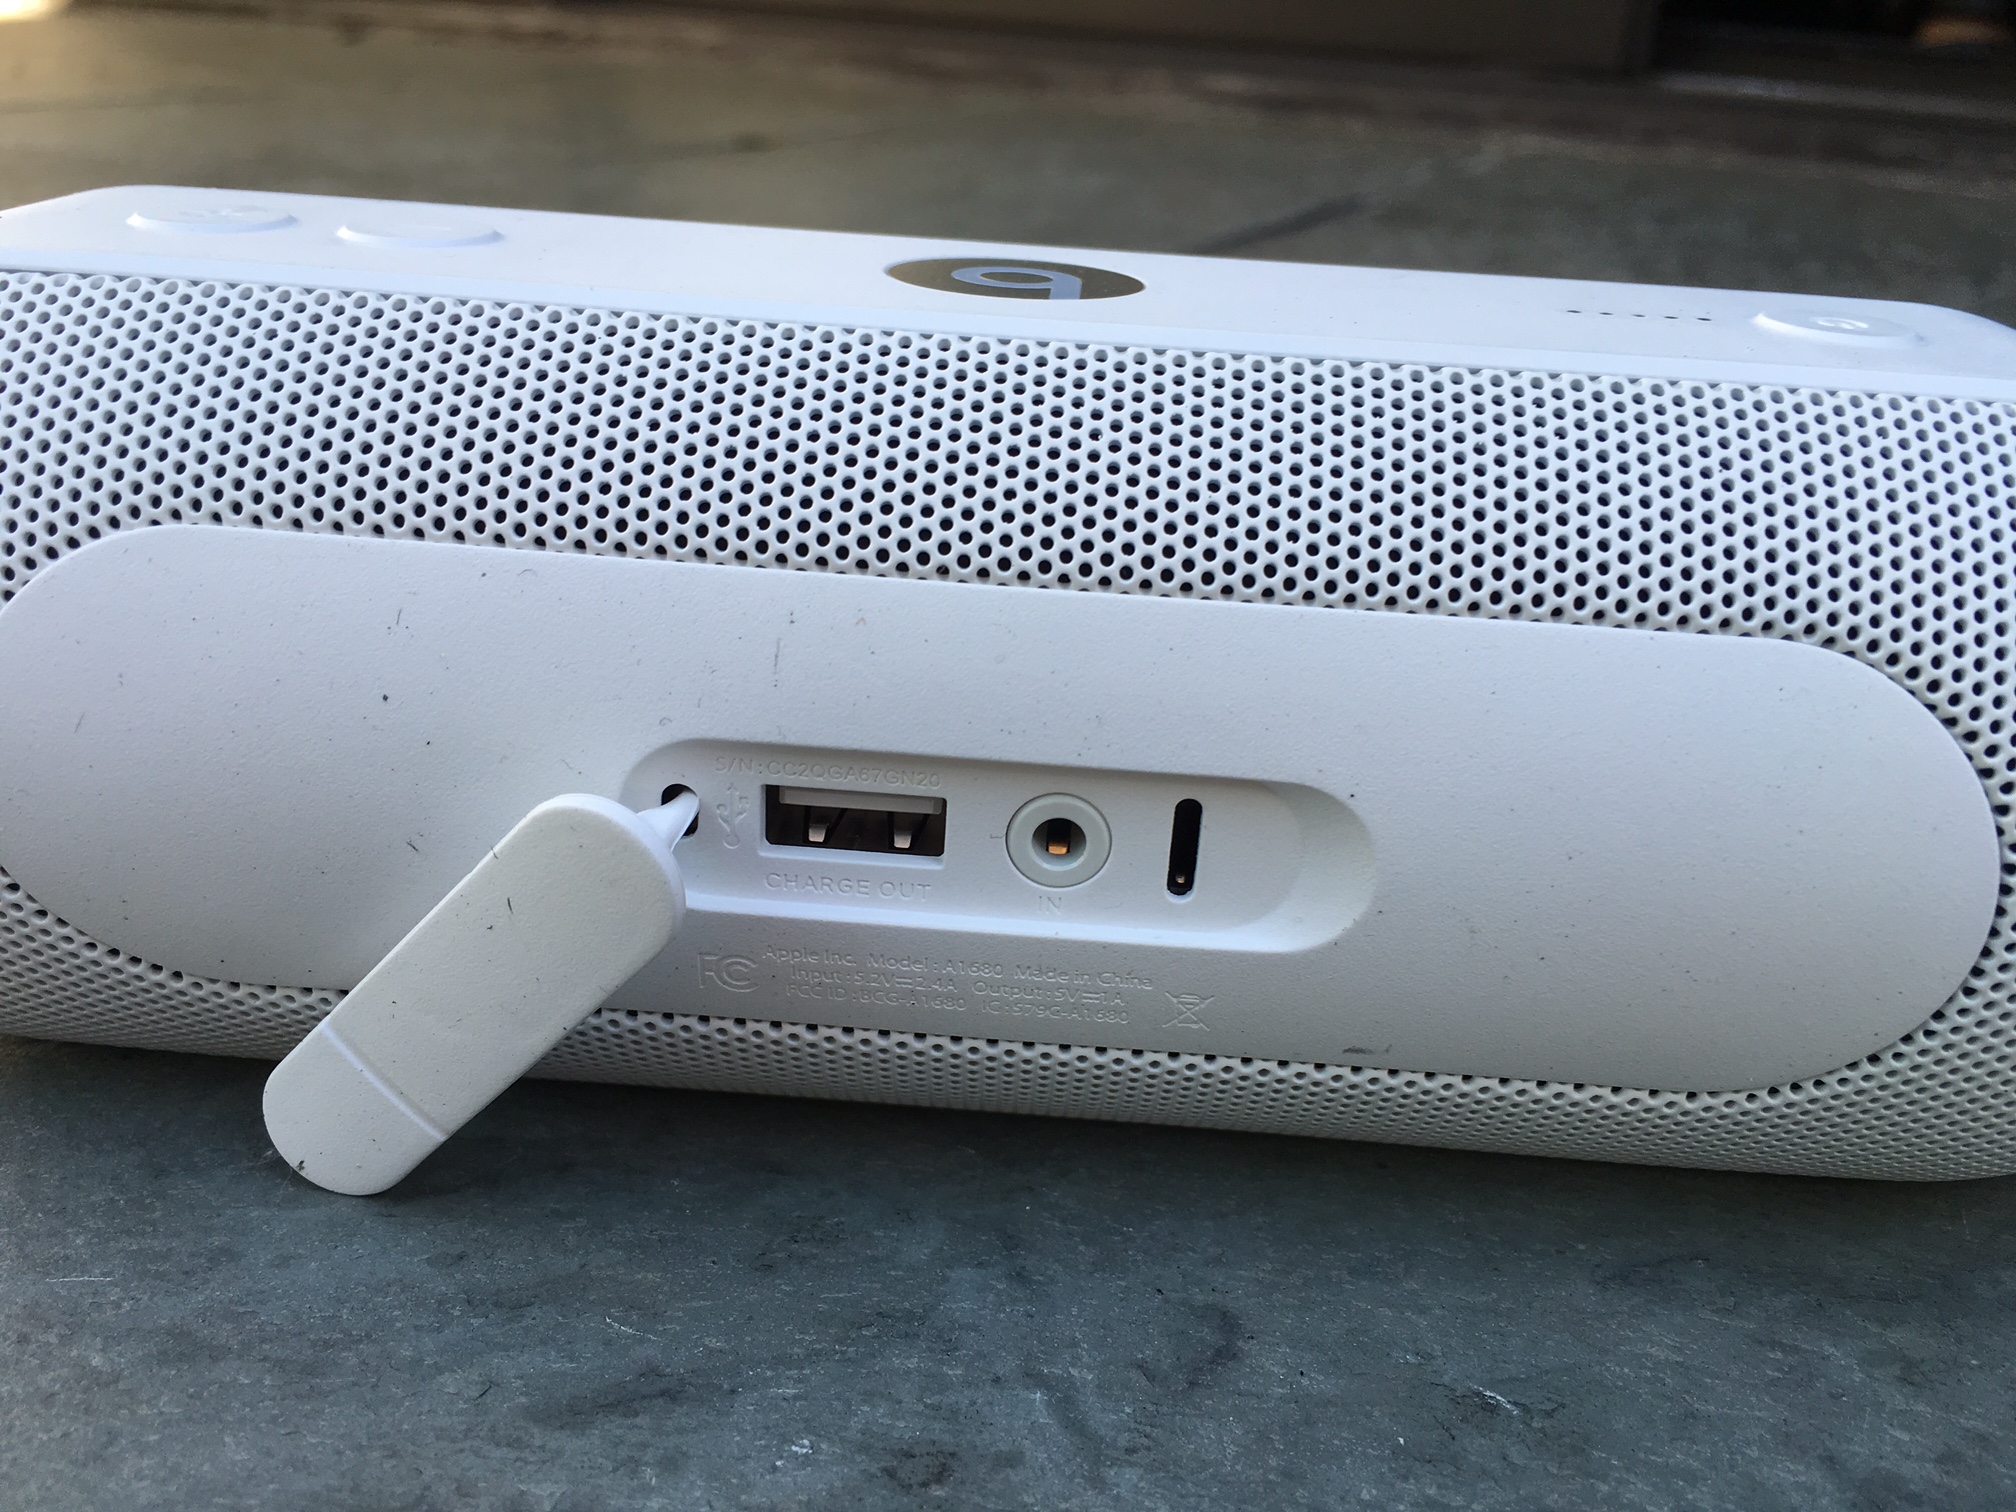 can you charge a beats pill through the usb port